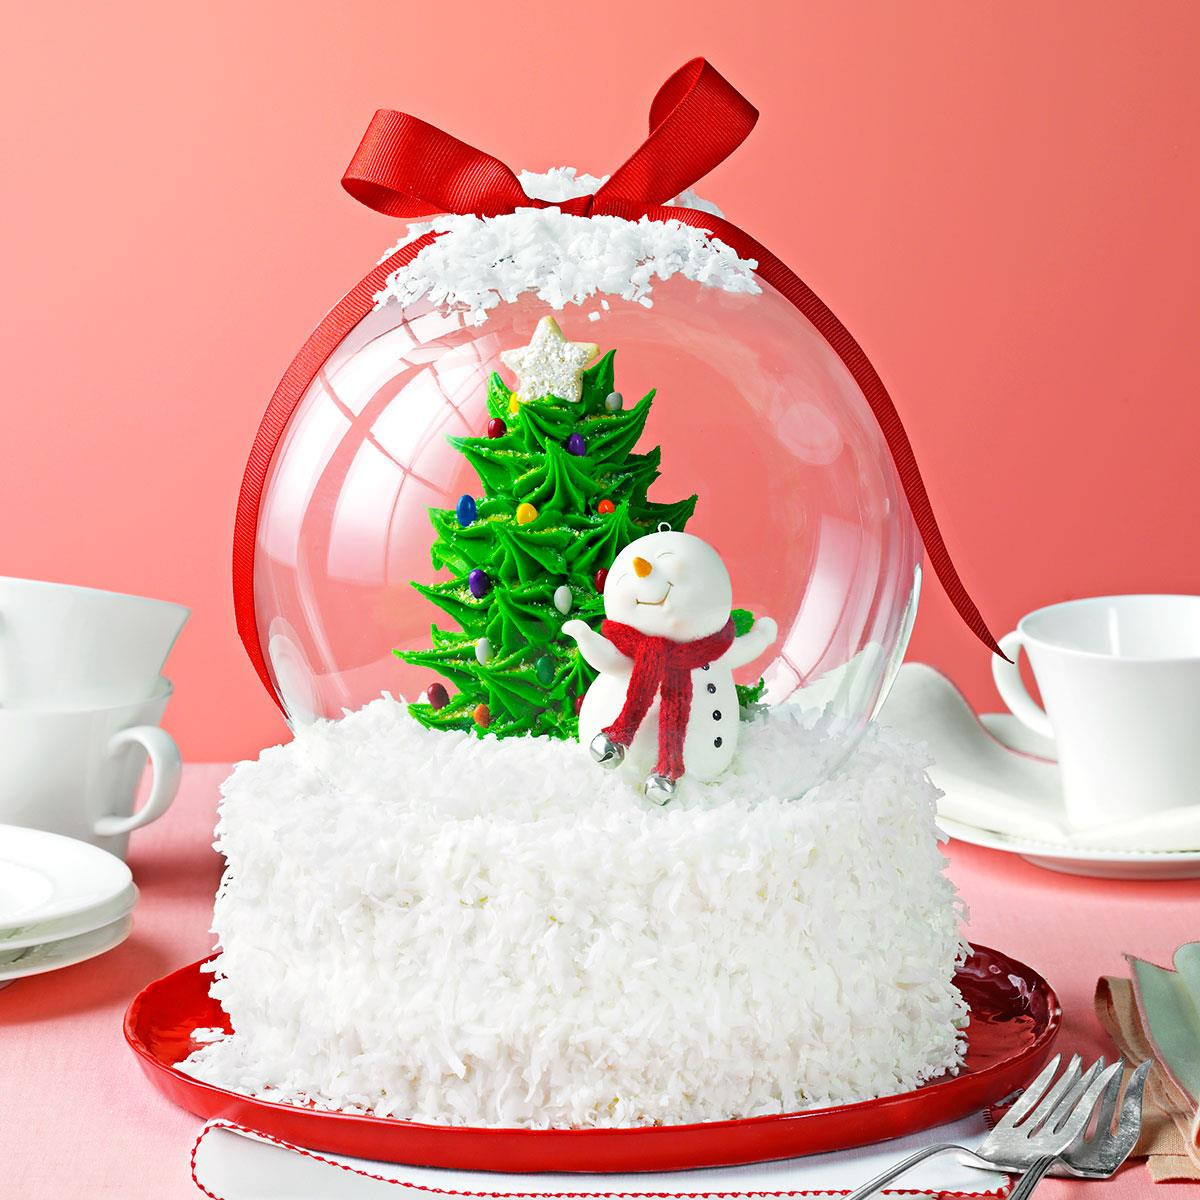 Best Christmas Cakes
 Our Very Best Christmas Cakes